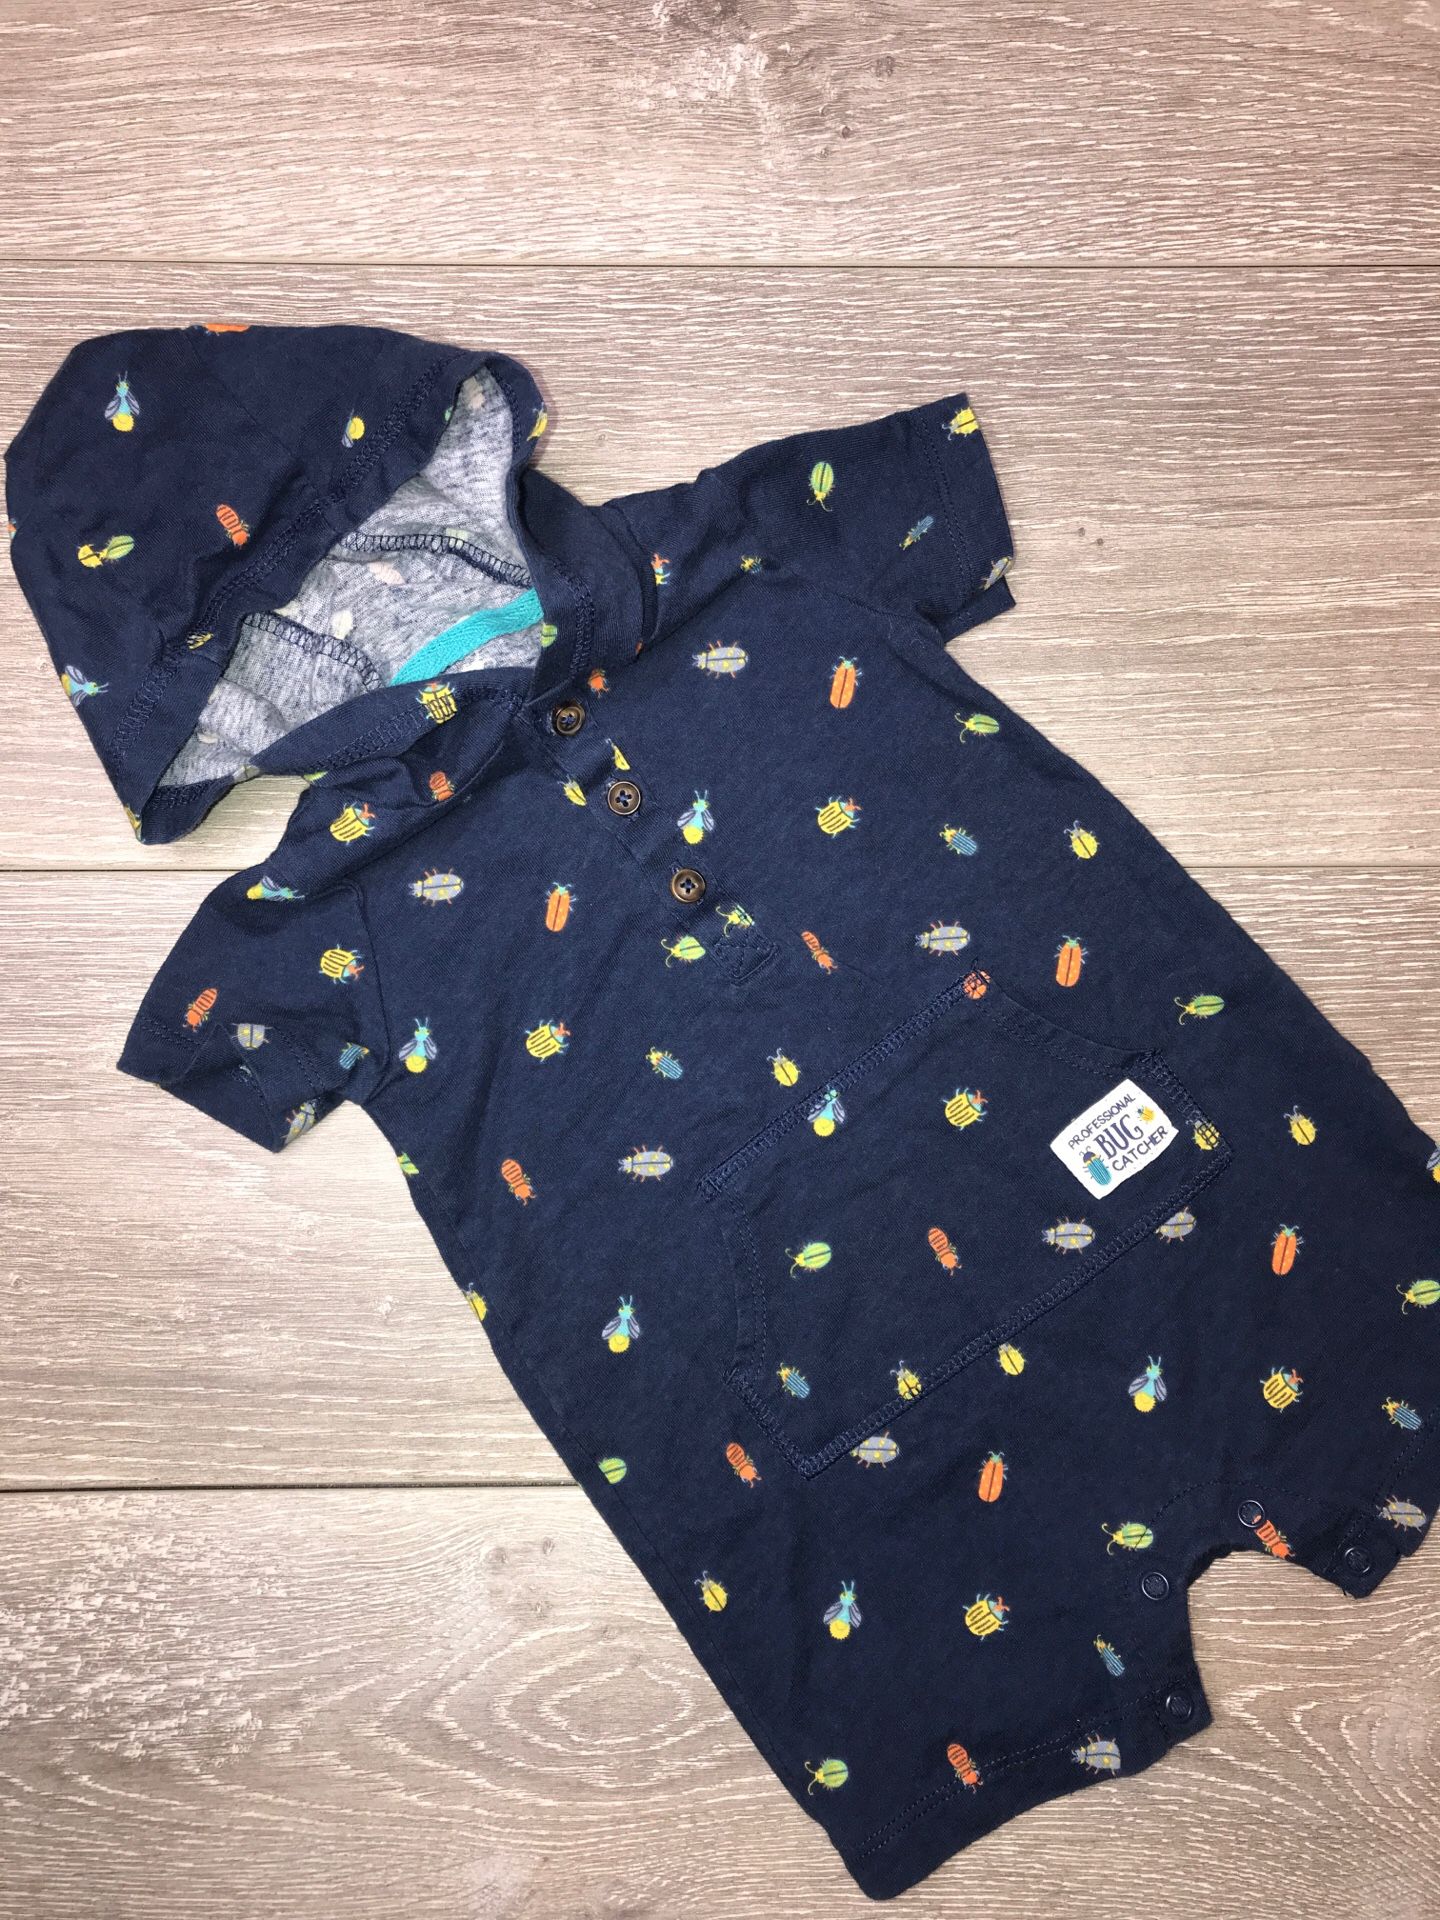 Baby Boy Clothing Carter’s Romper 12 Months $2.50